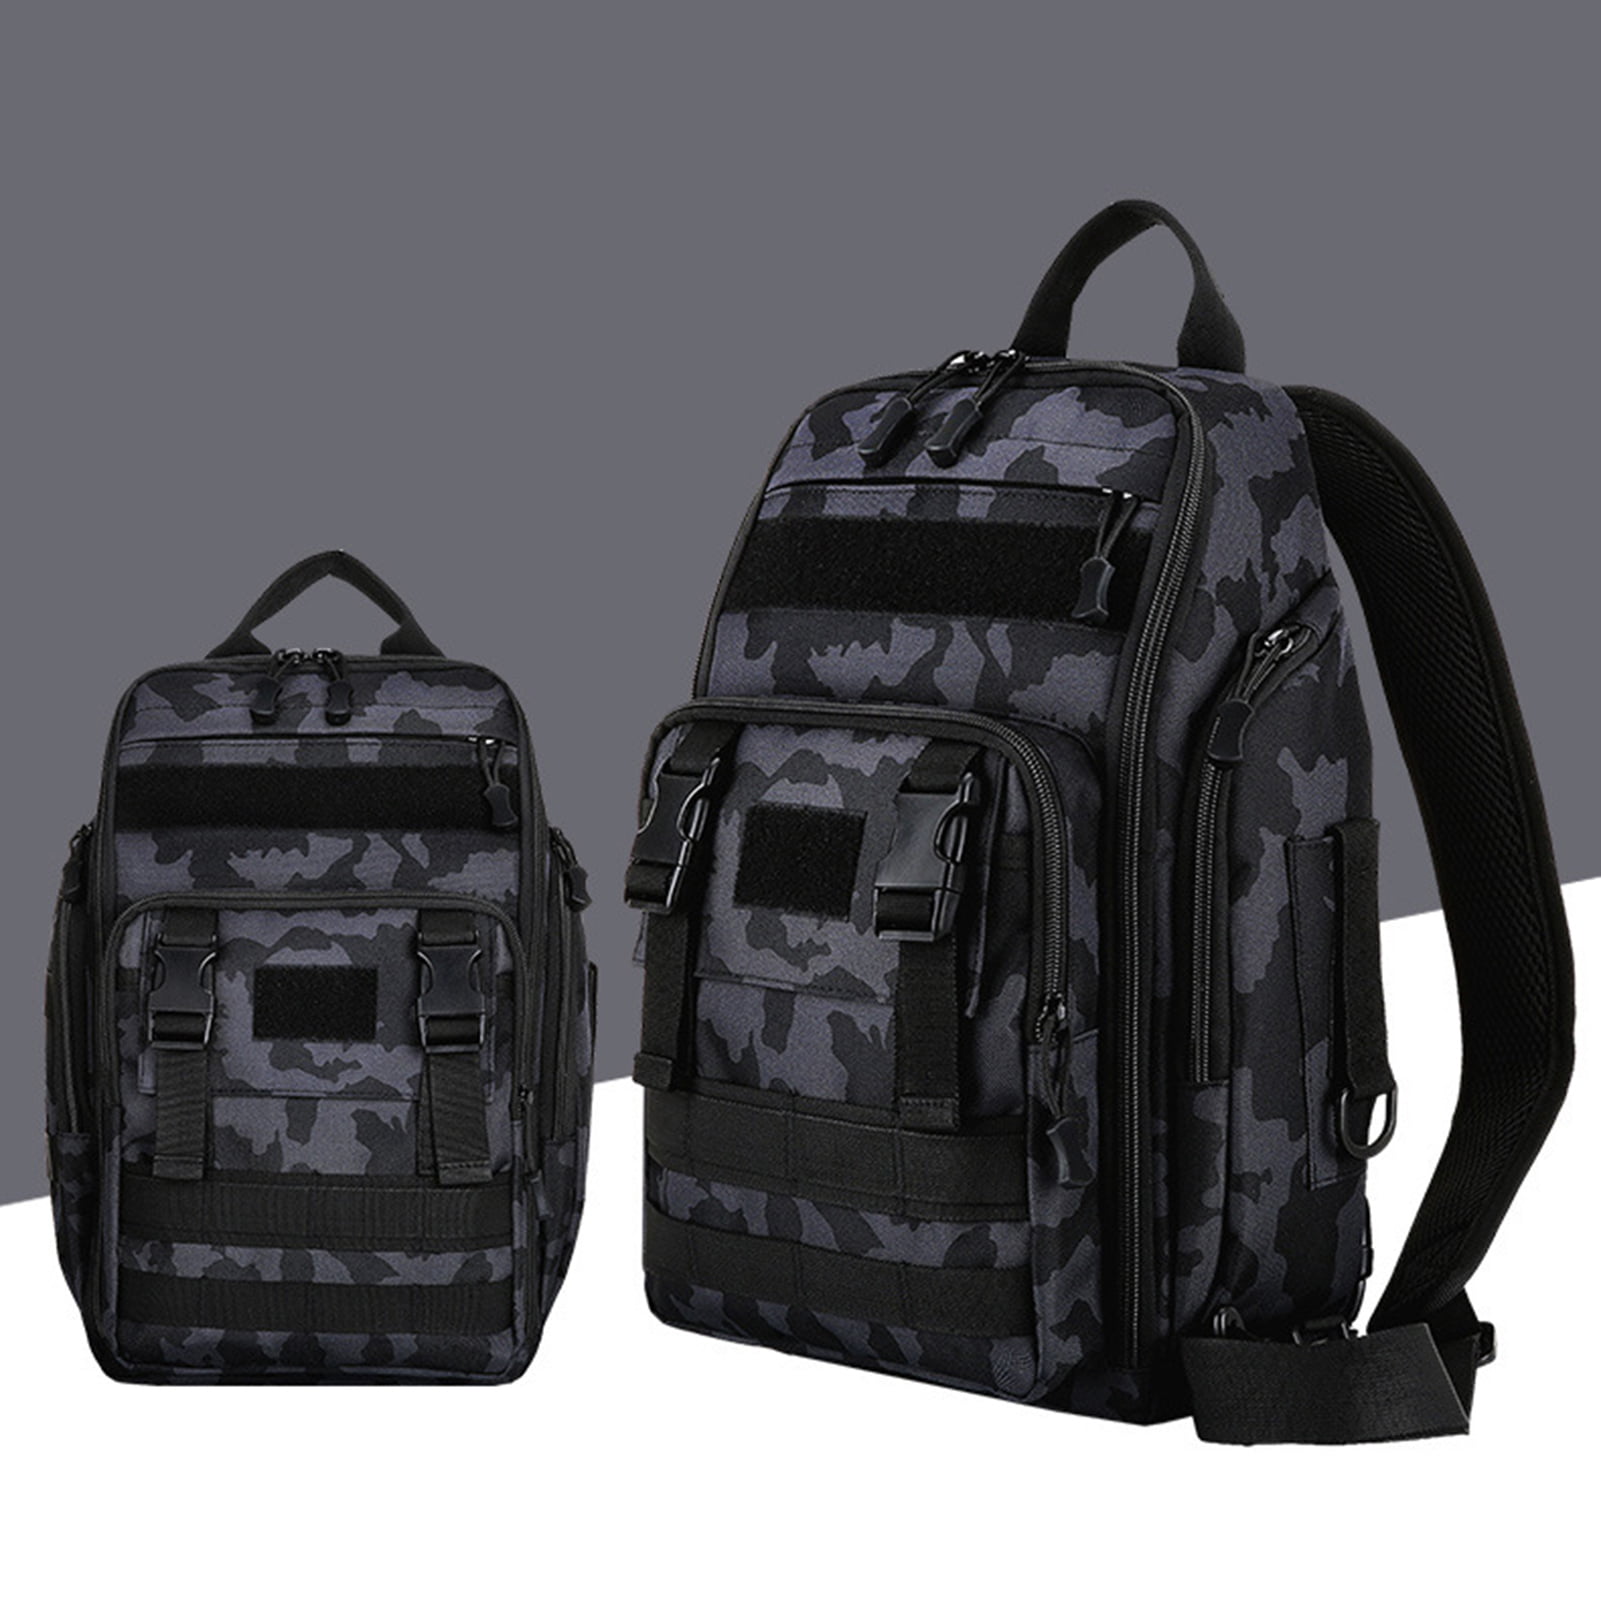 5 POCKET Details about   BACK PACK ACU/NAVY free shipping 